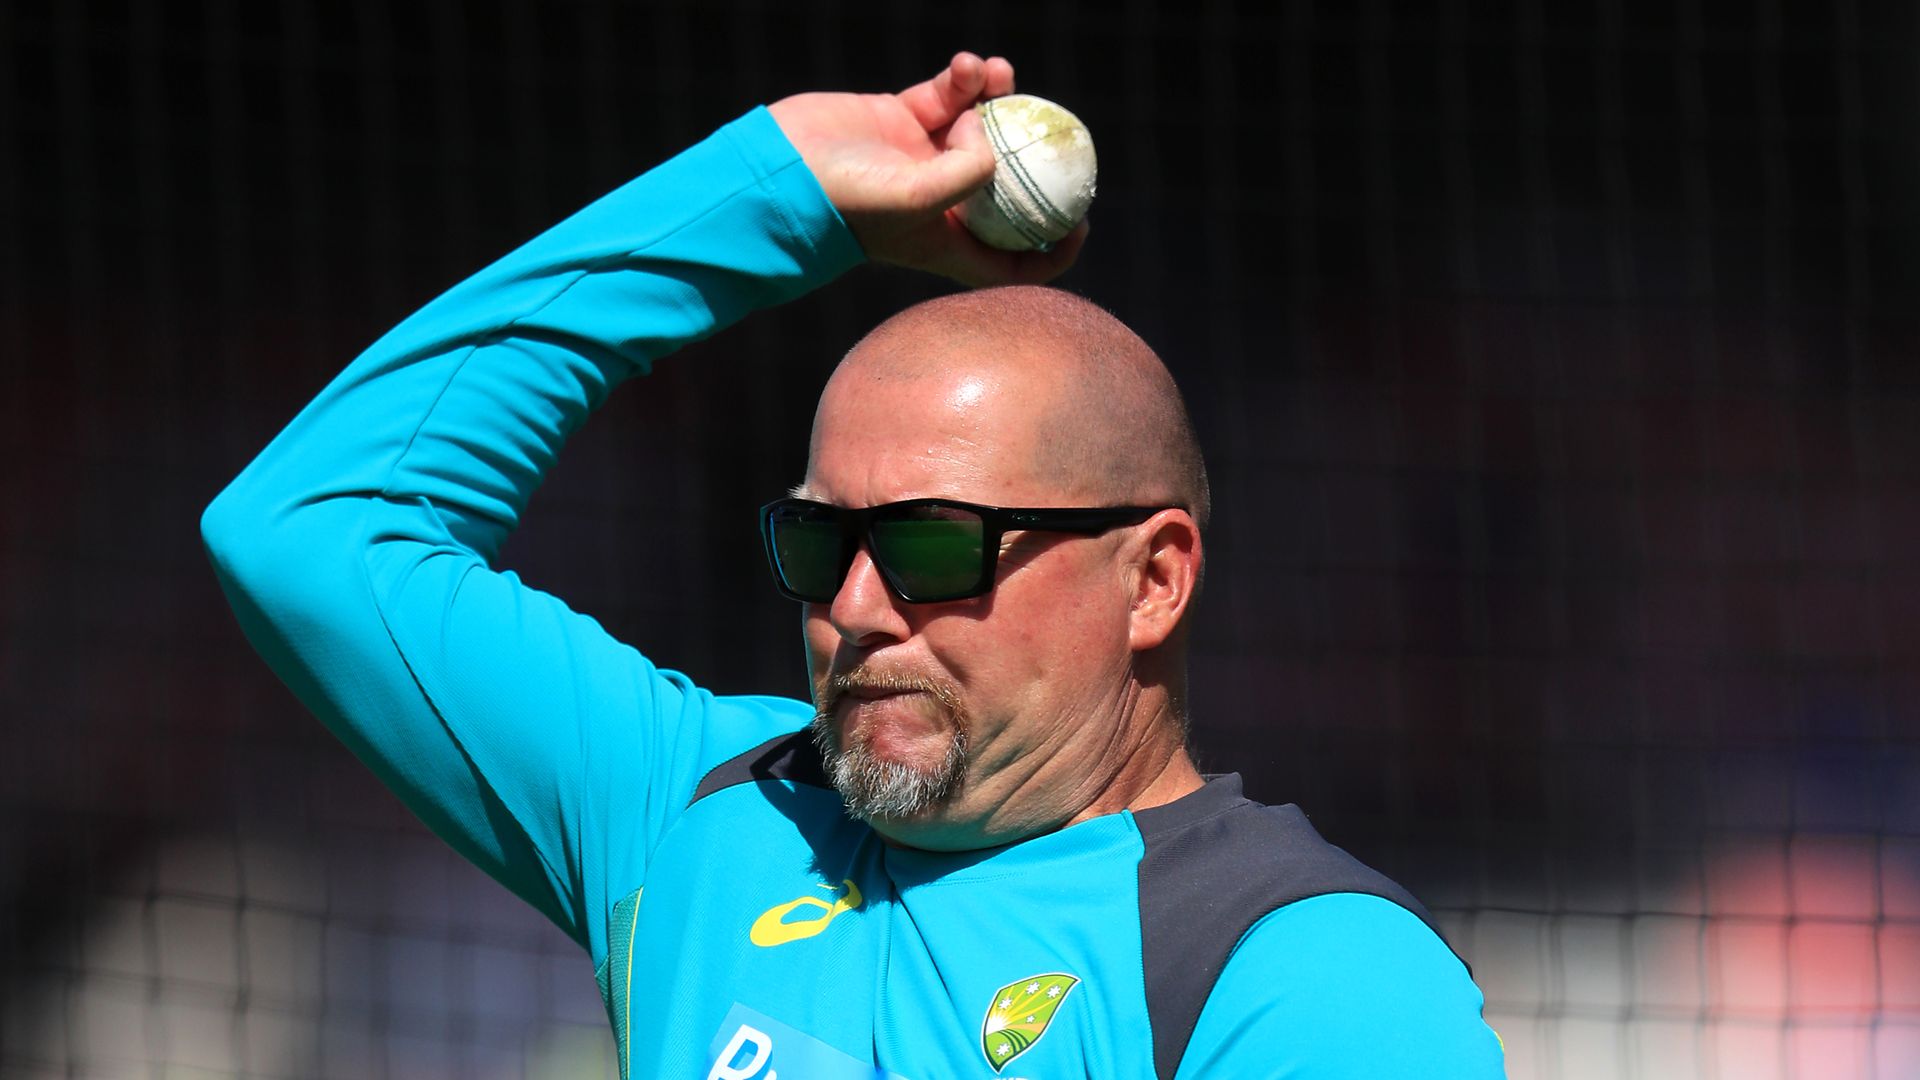 Saker named England fast bowling coach for The Ashes